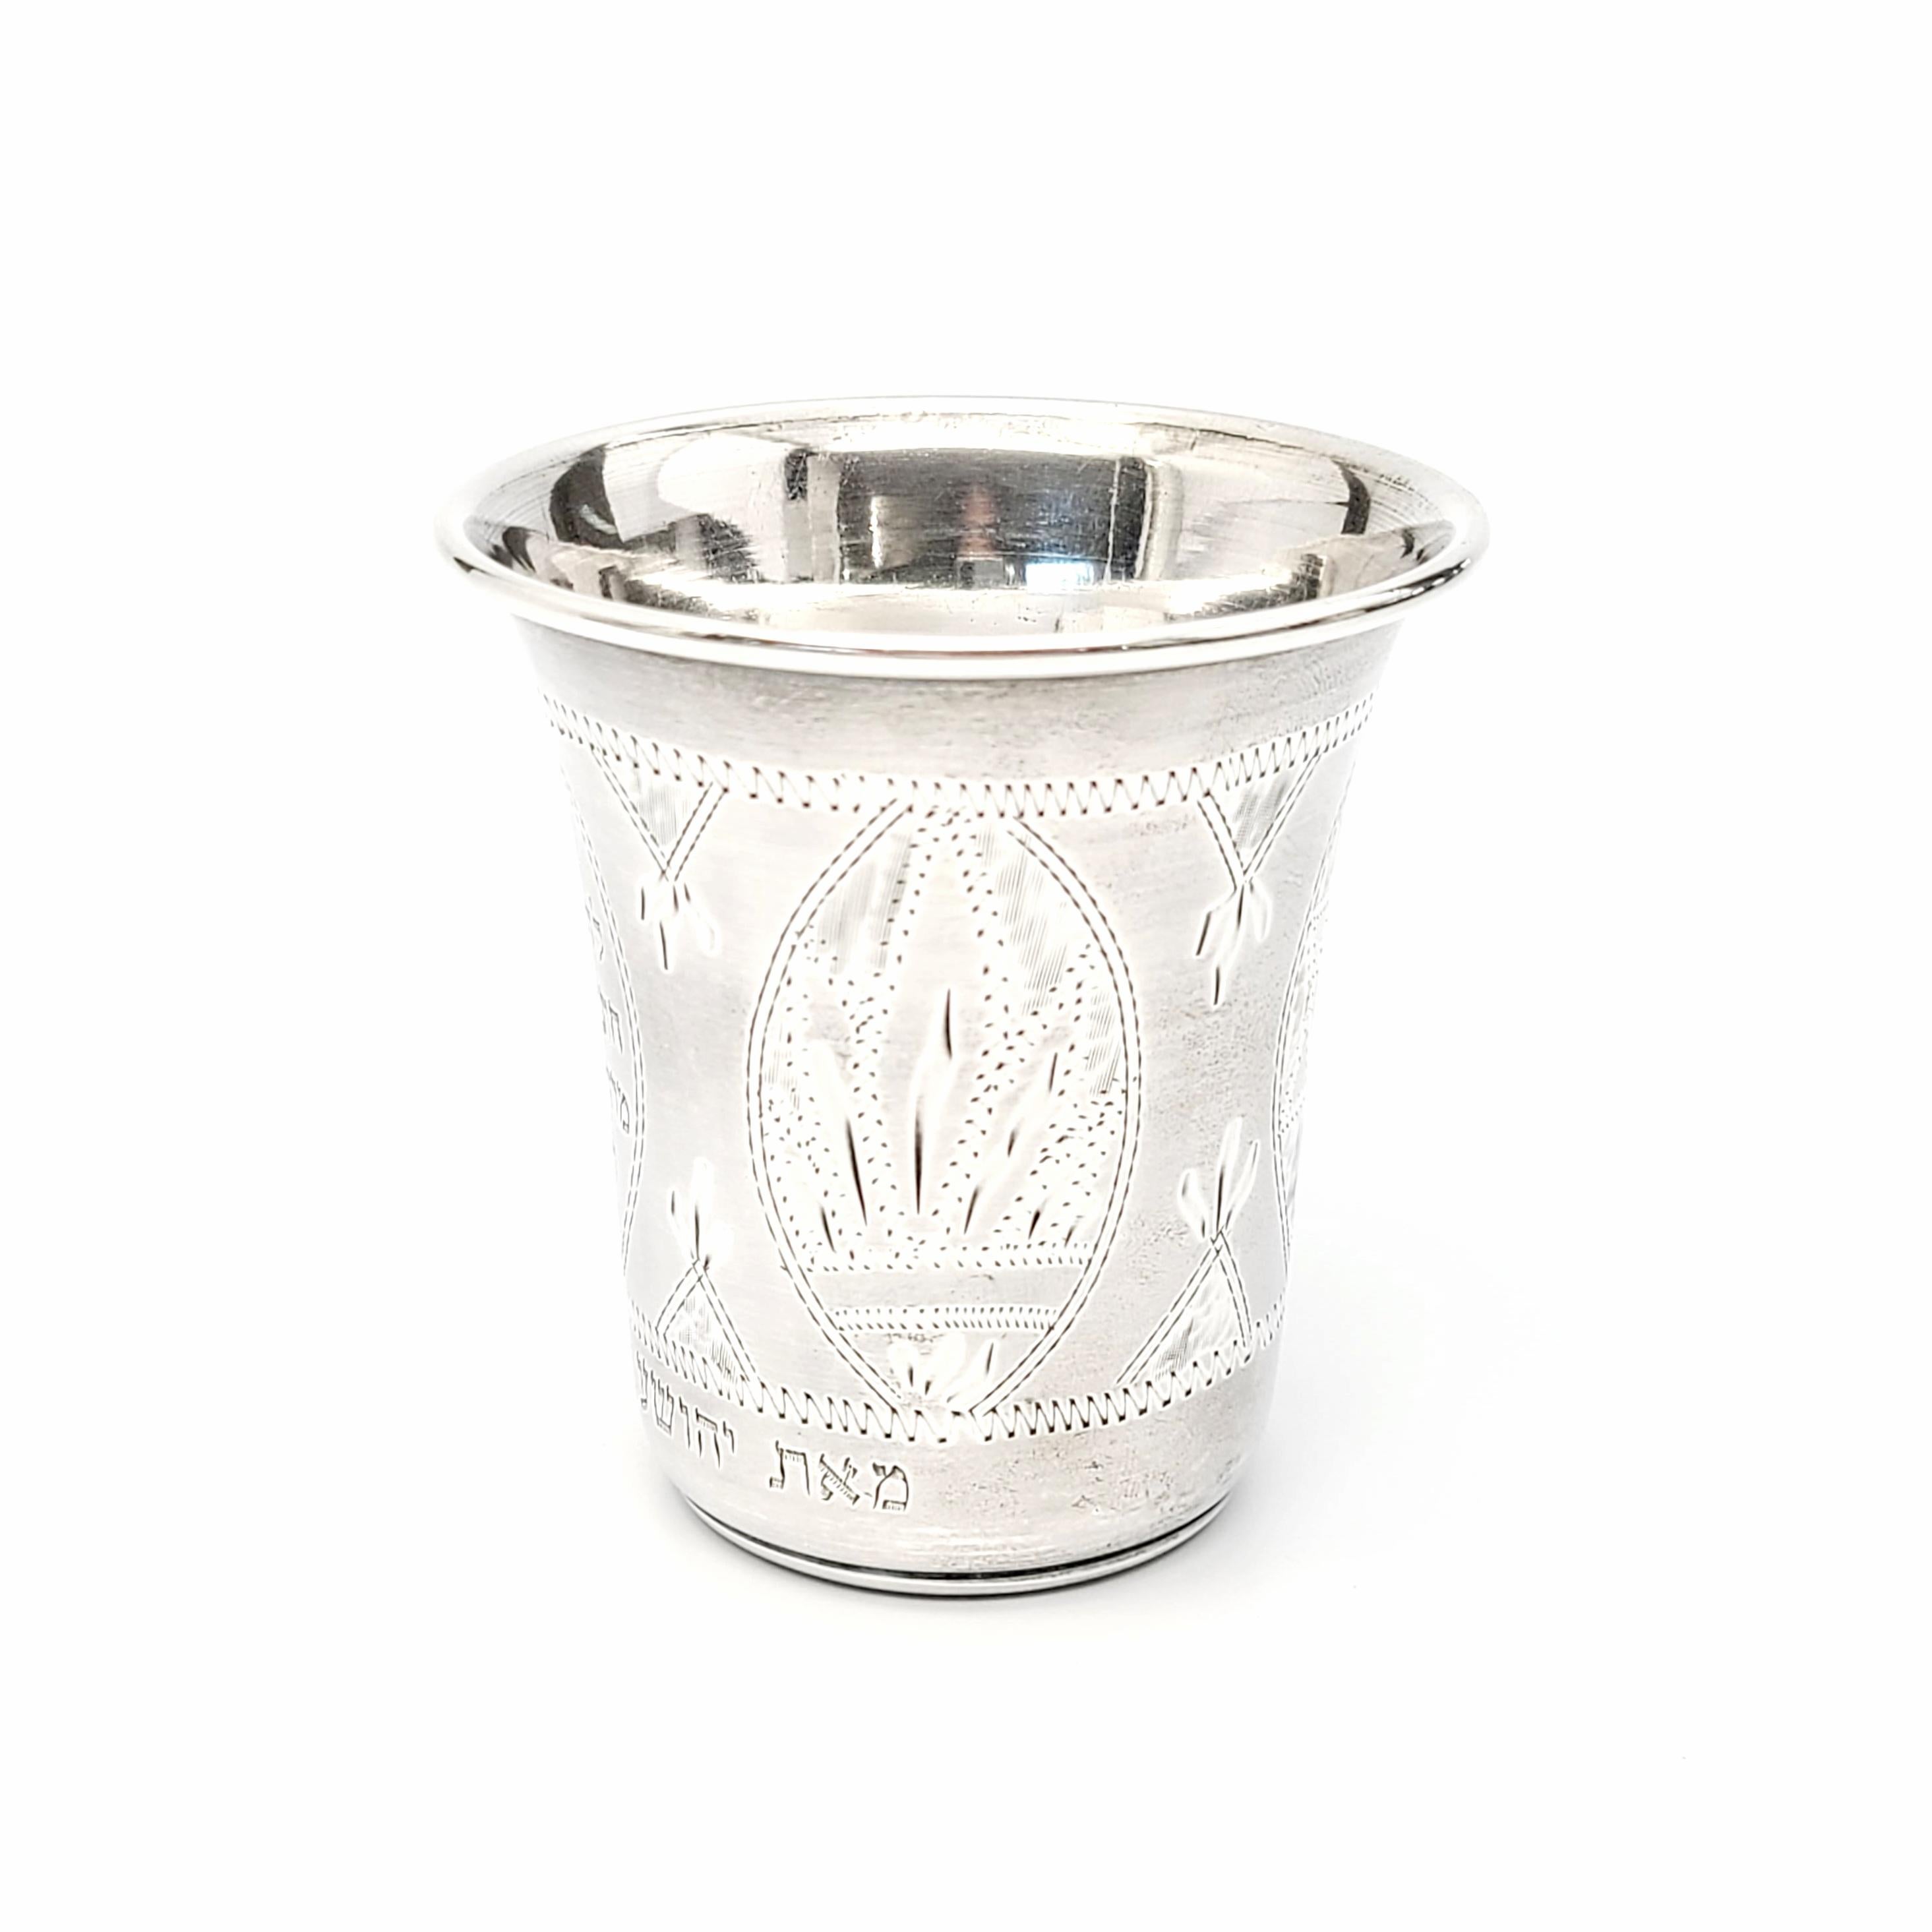 Vintage Judaica sterling silver vodka or kiddush cup.

Beautiful bright cut etched design on 4 panels around the cup. 3 panels are leaf-like in design, and the 4th panel has a hebrew saying on it.

Measures 2 5/8